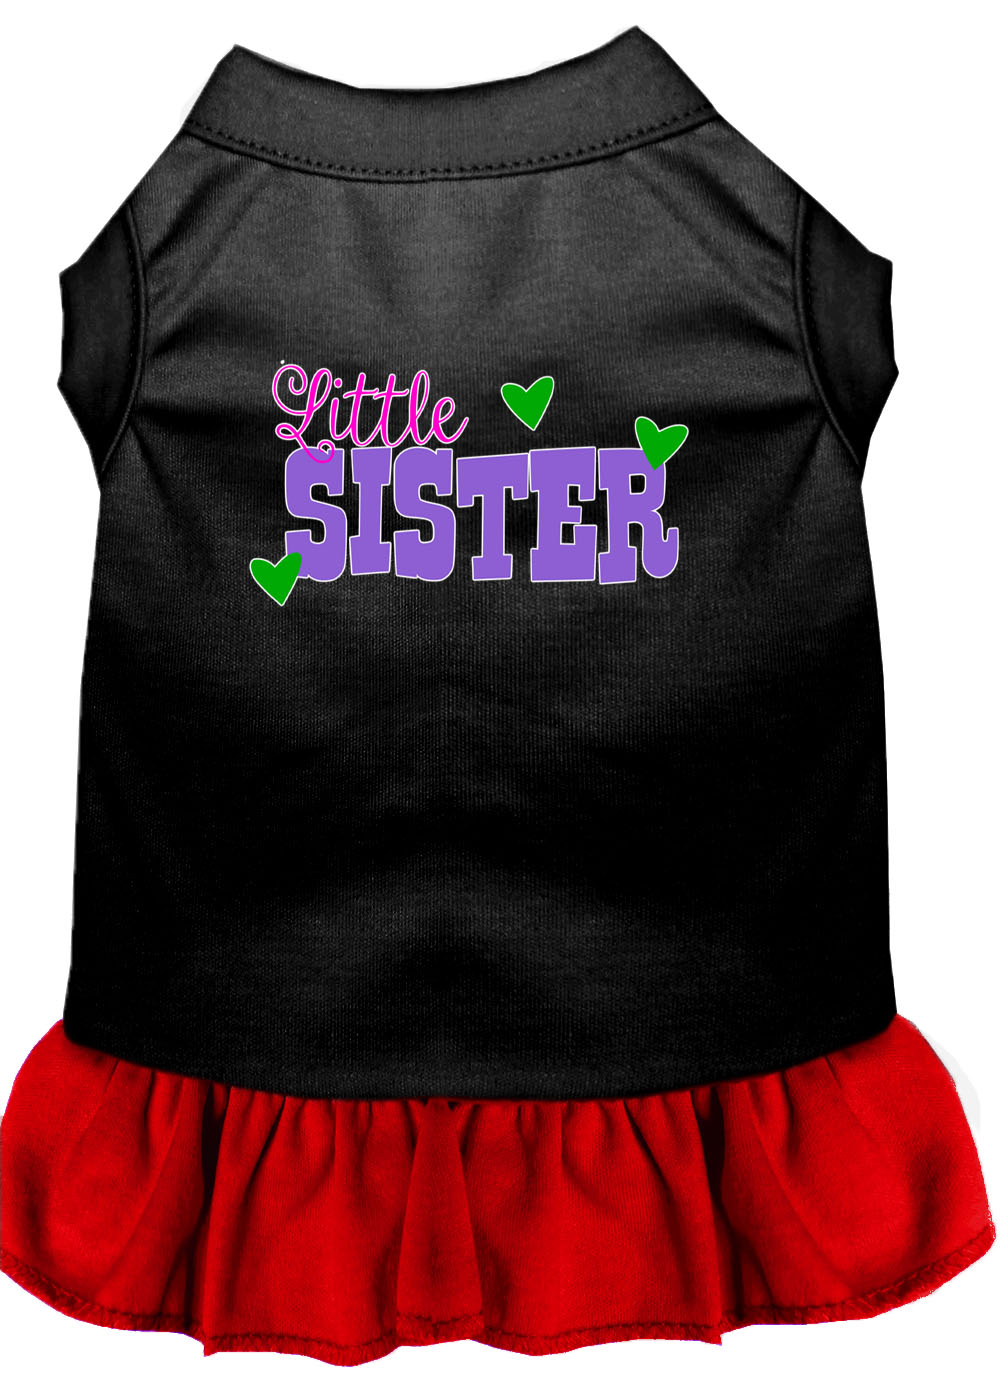 Little Sister Screen Print Dog Dress Black with Red XL